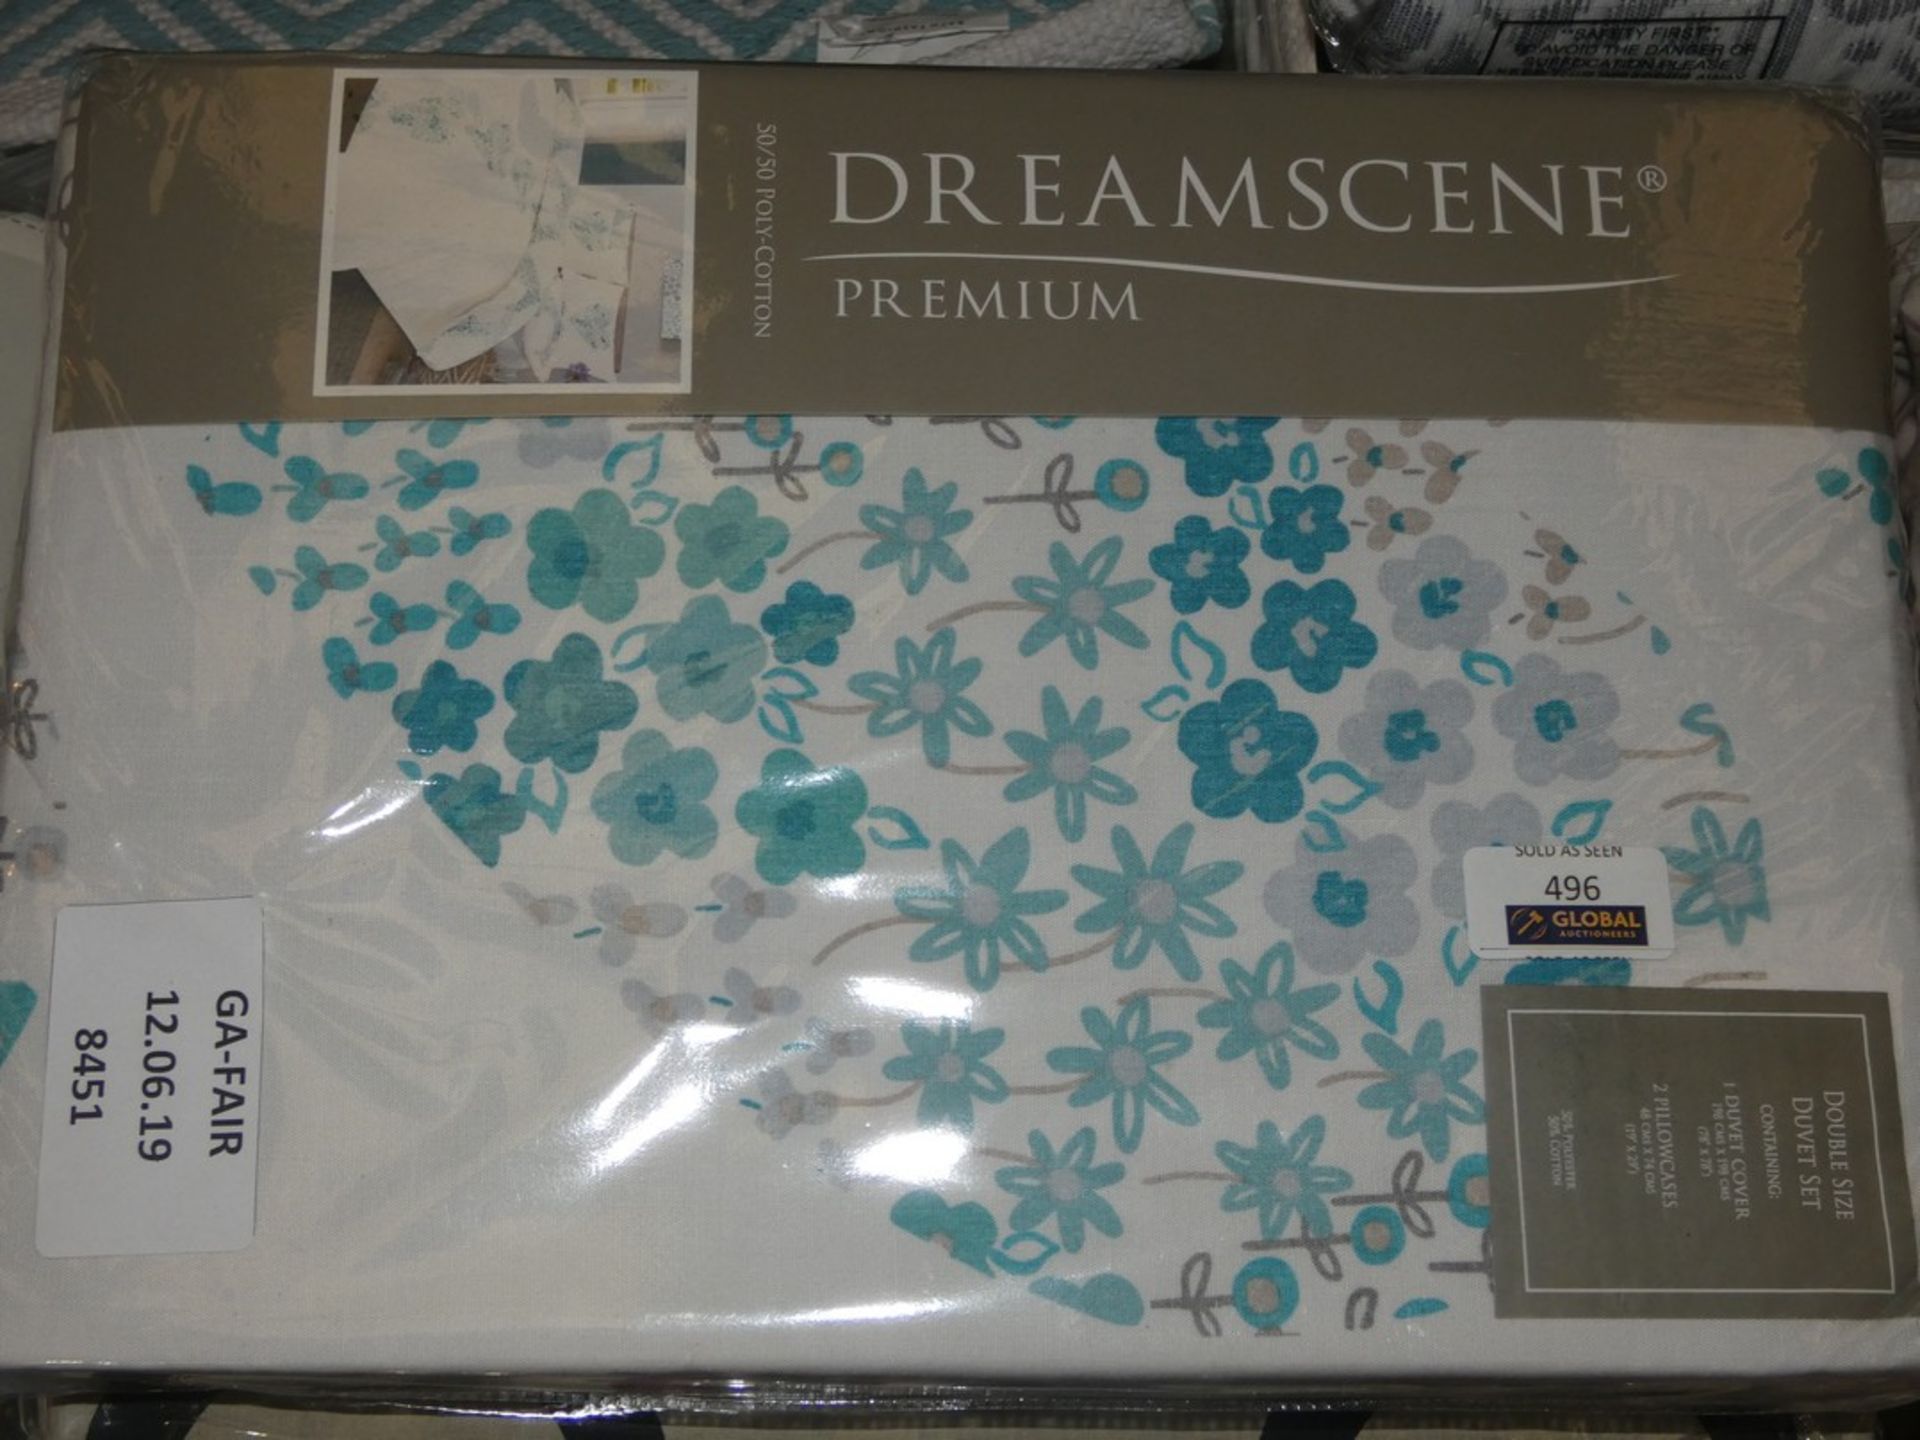 Lot to Contain 4 Assorted Brand New Designer Bedding Items to Include Dream Scene Bedding Sets,